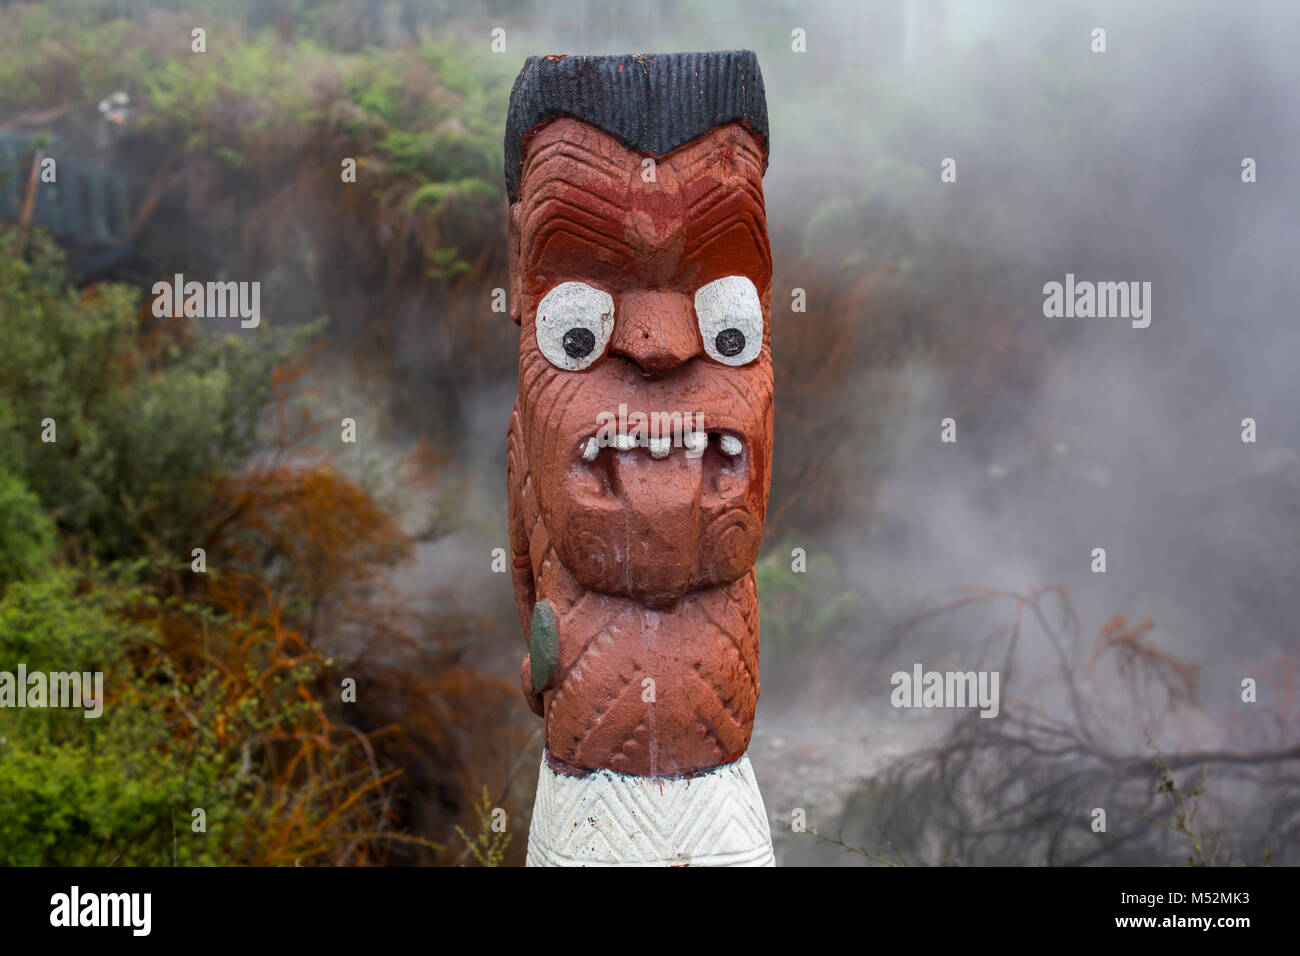 Maori Wood Carving sculpture with Tongue Out and steam in the background Stock Photo